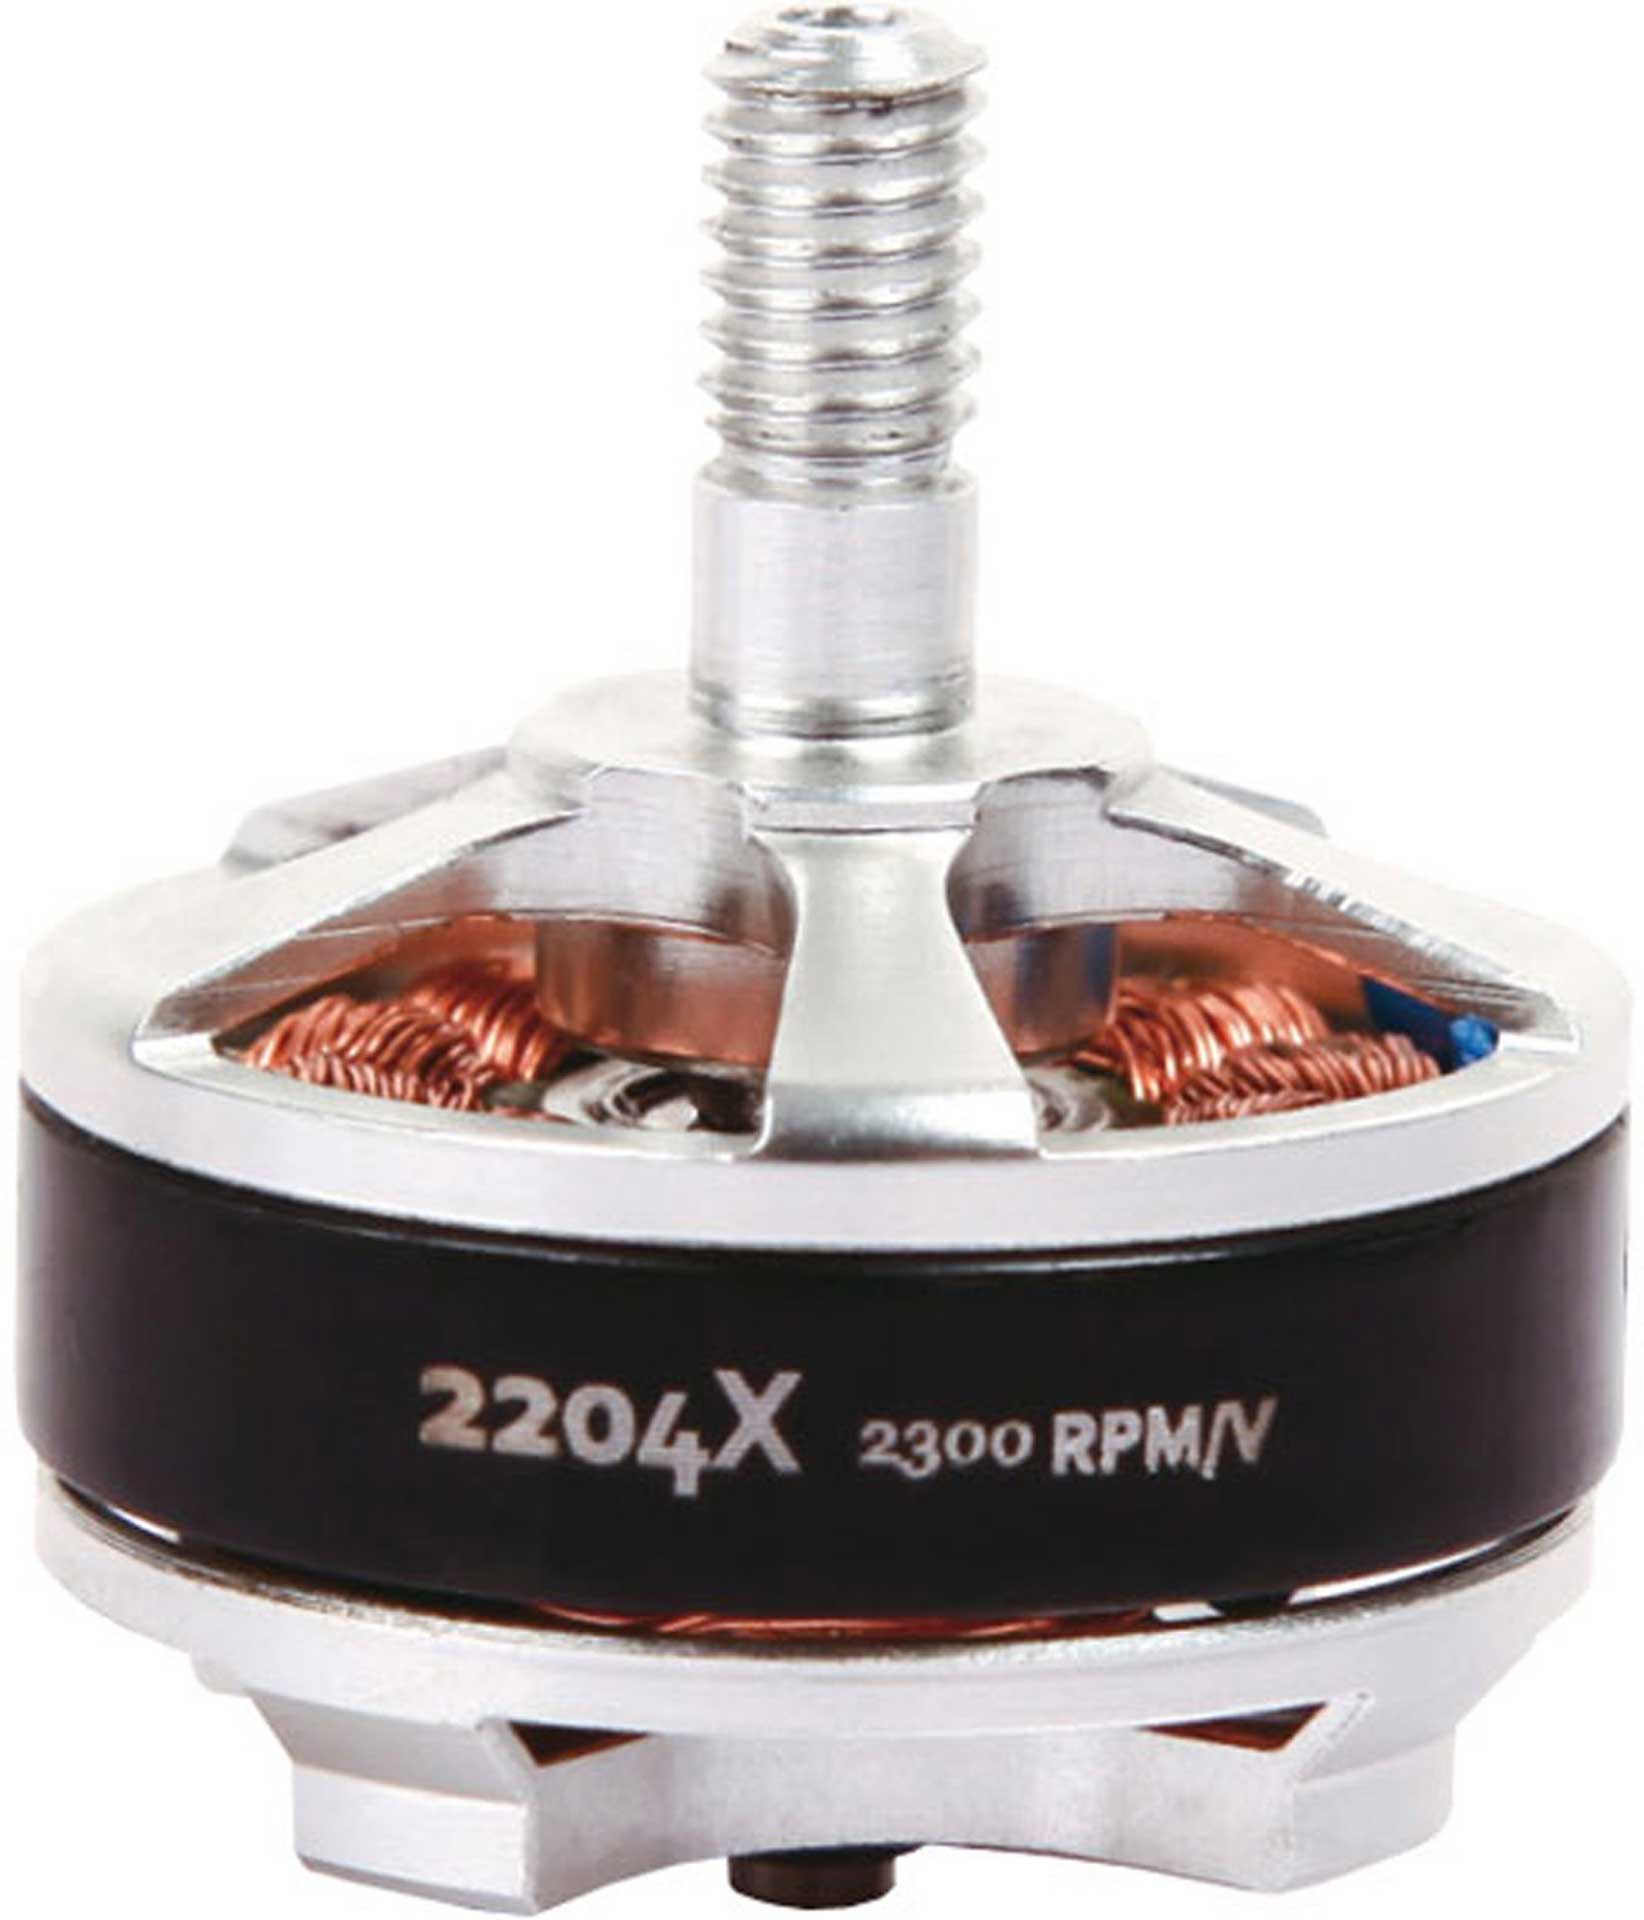 PLANET-HOBBY ECO 2204X 2300 KV BRUSHLESS MOTOR IDEAL FOR MULTICOPTER AND DRONES